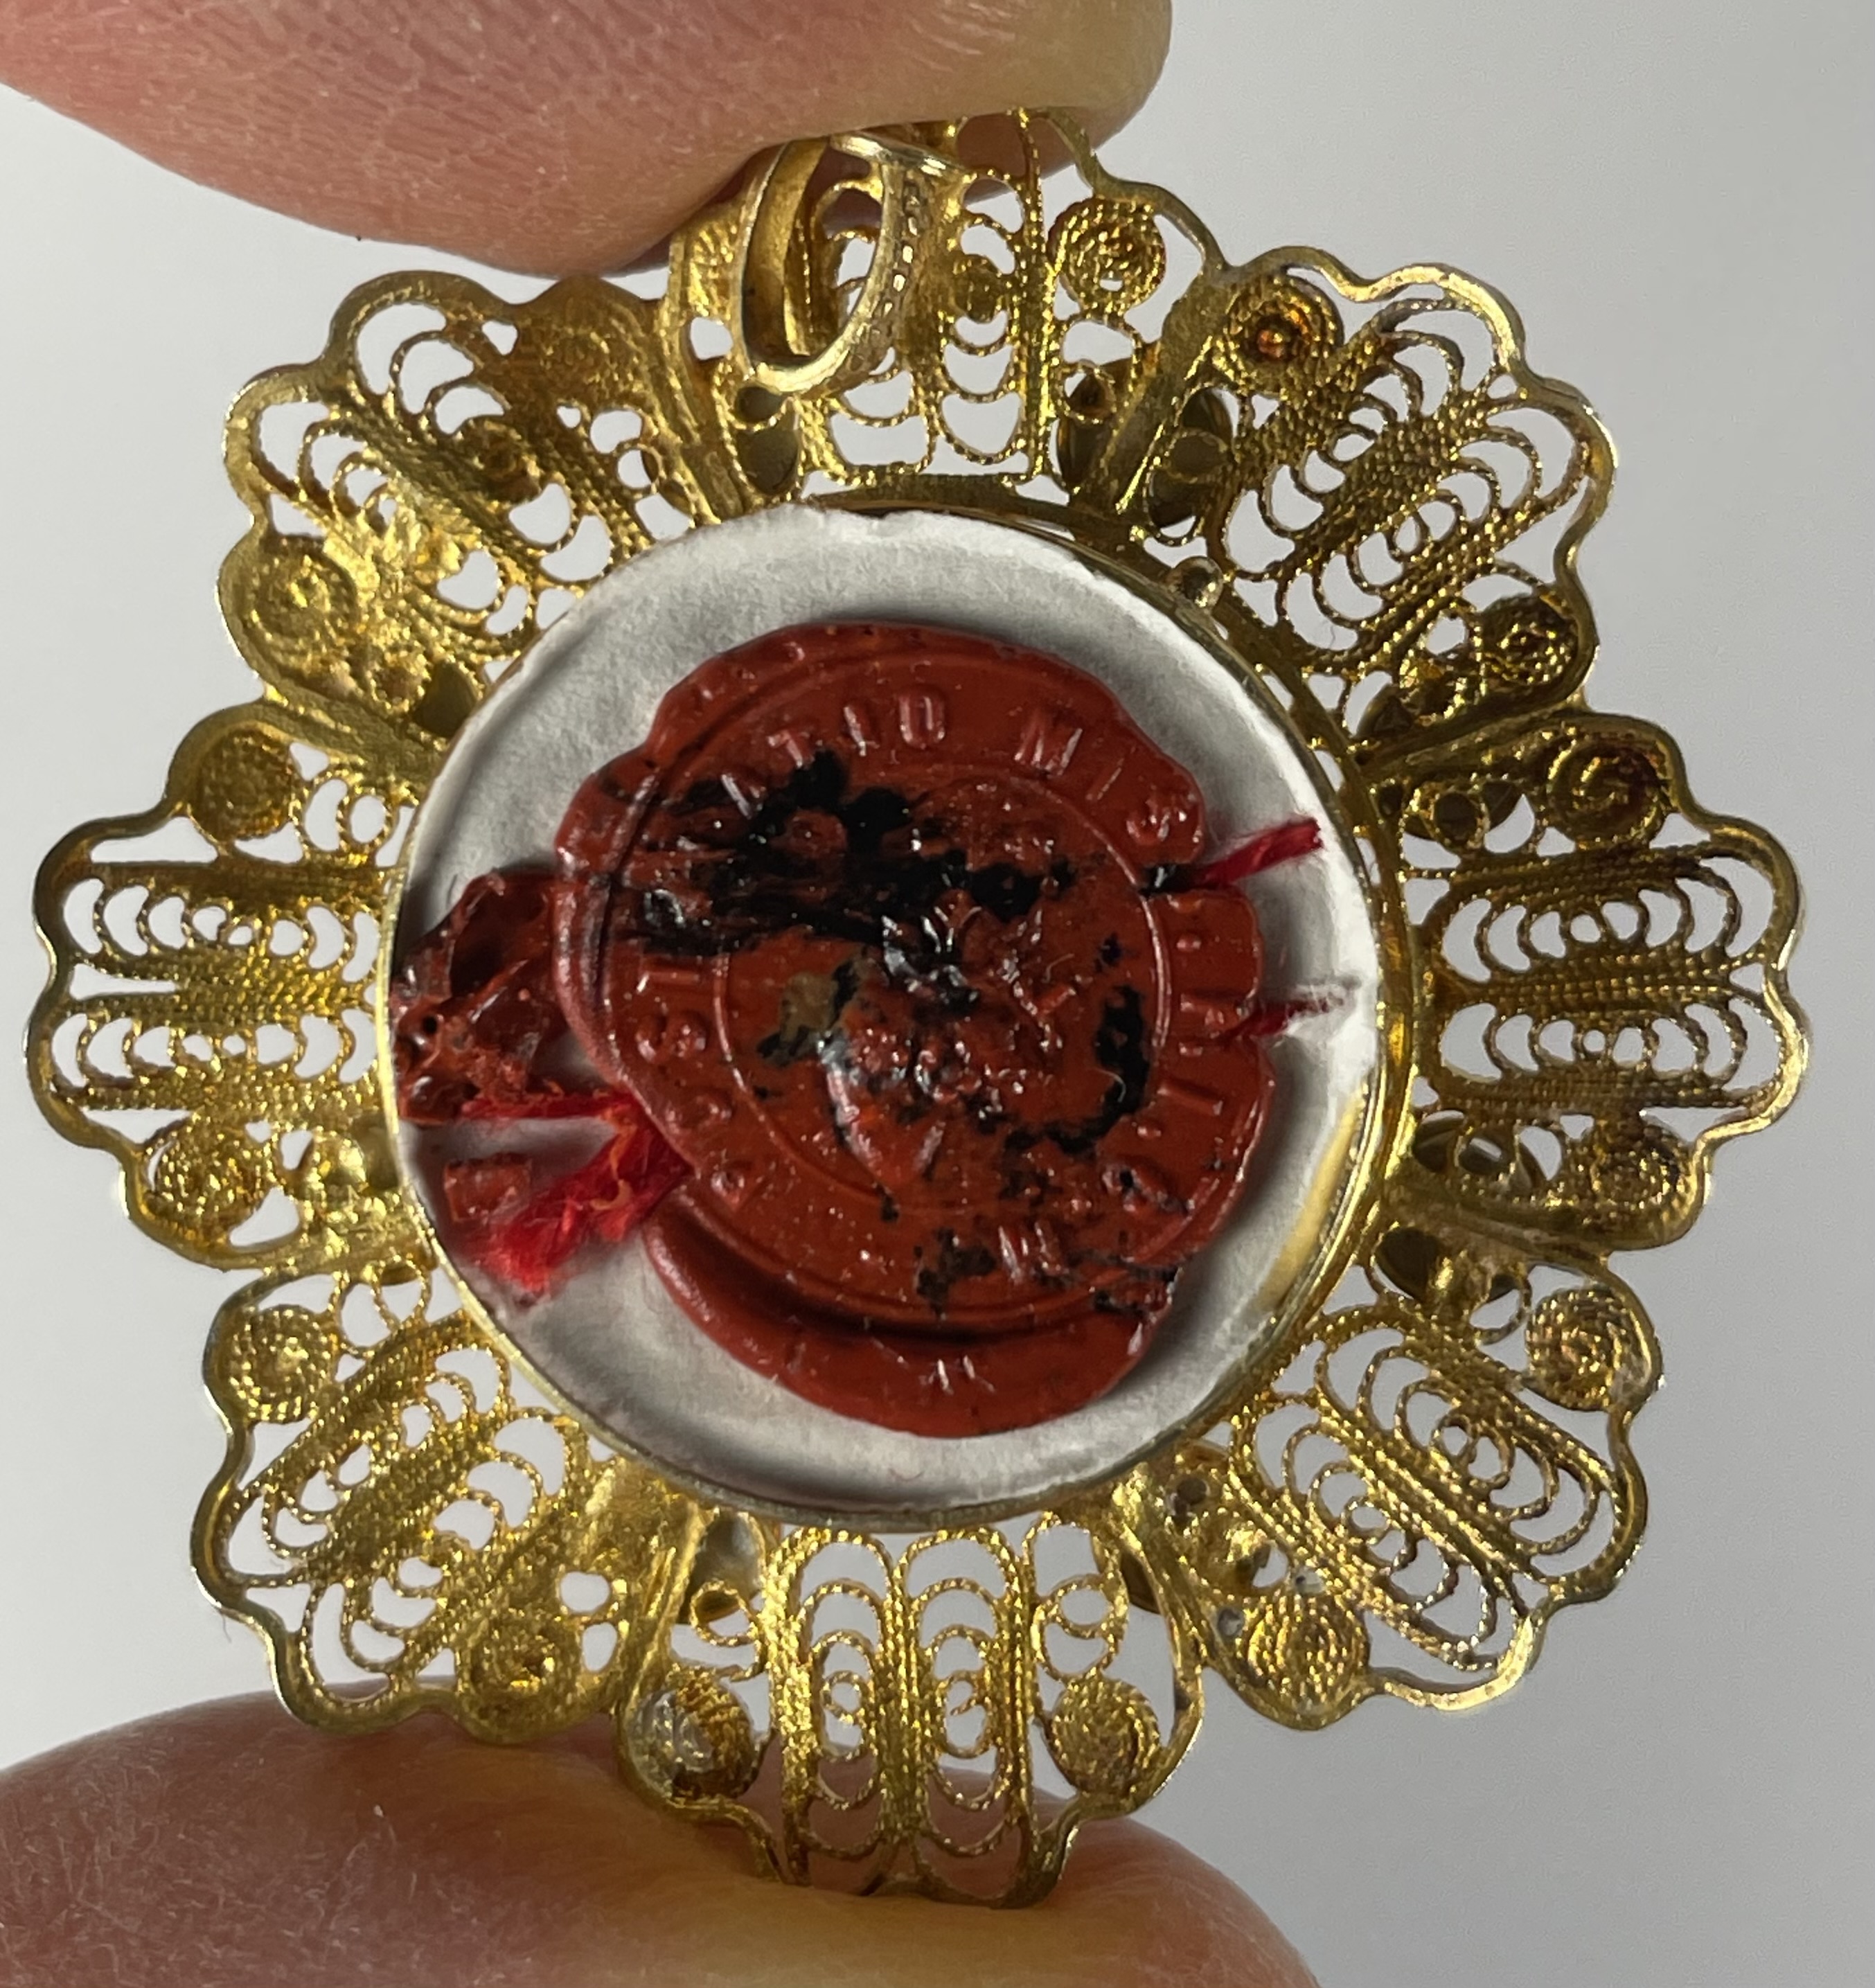 Unfolding the Mysteries of Sealing Wax and Wafers – A Victorian Passage